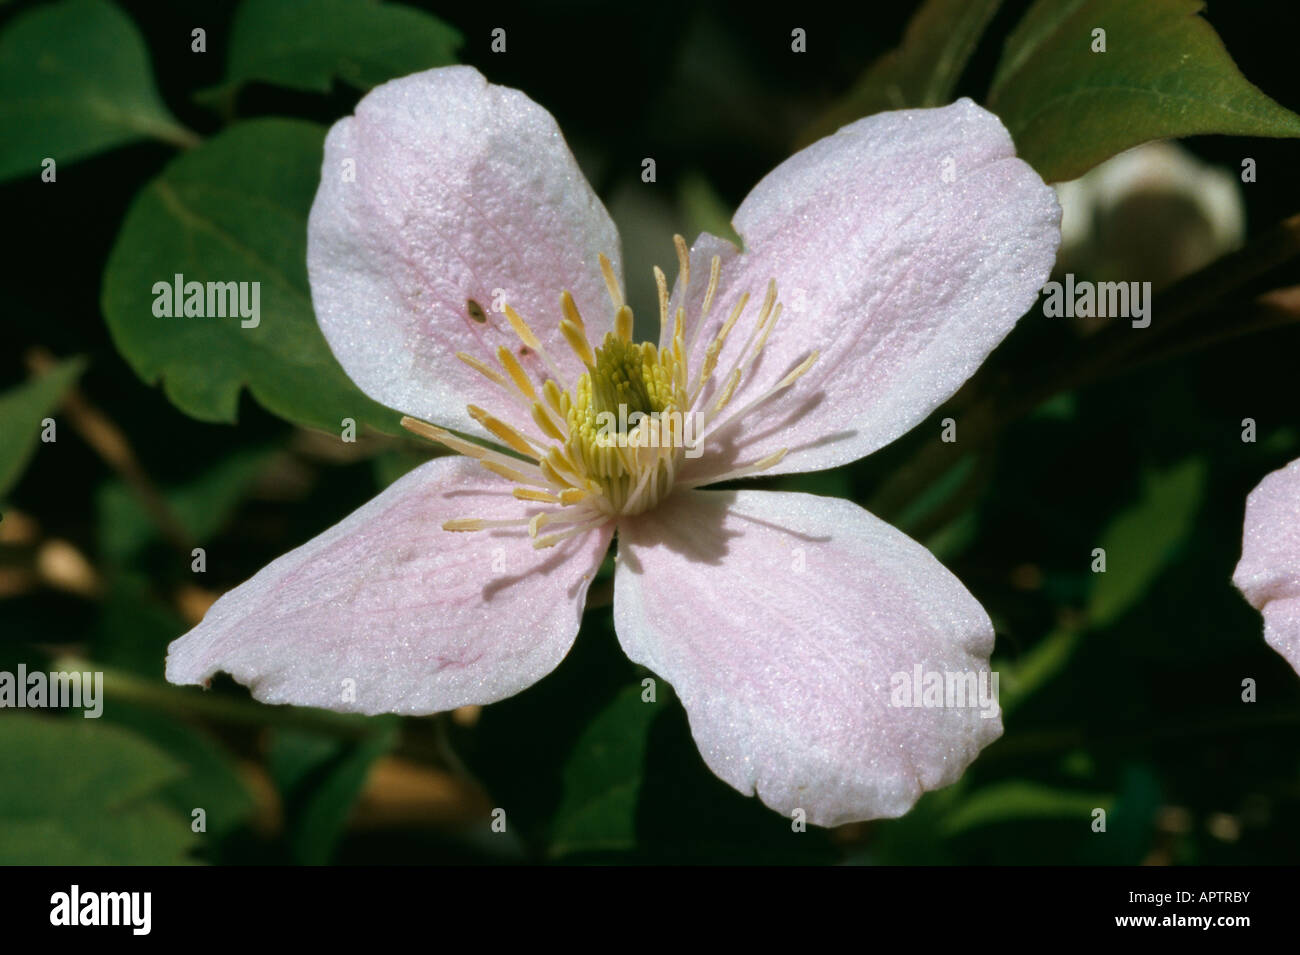 Clematis montana pink tender lovable delicate inviting Stock Photo